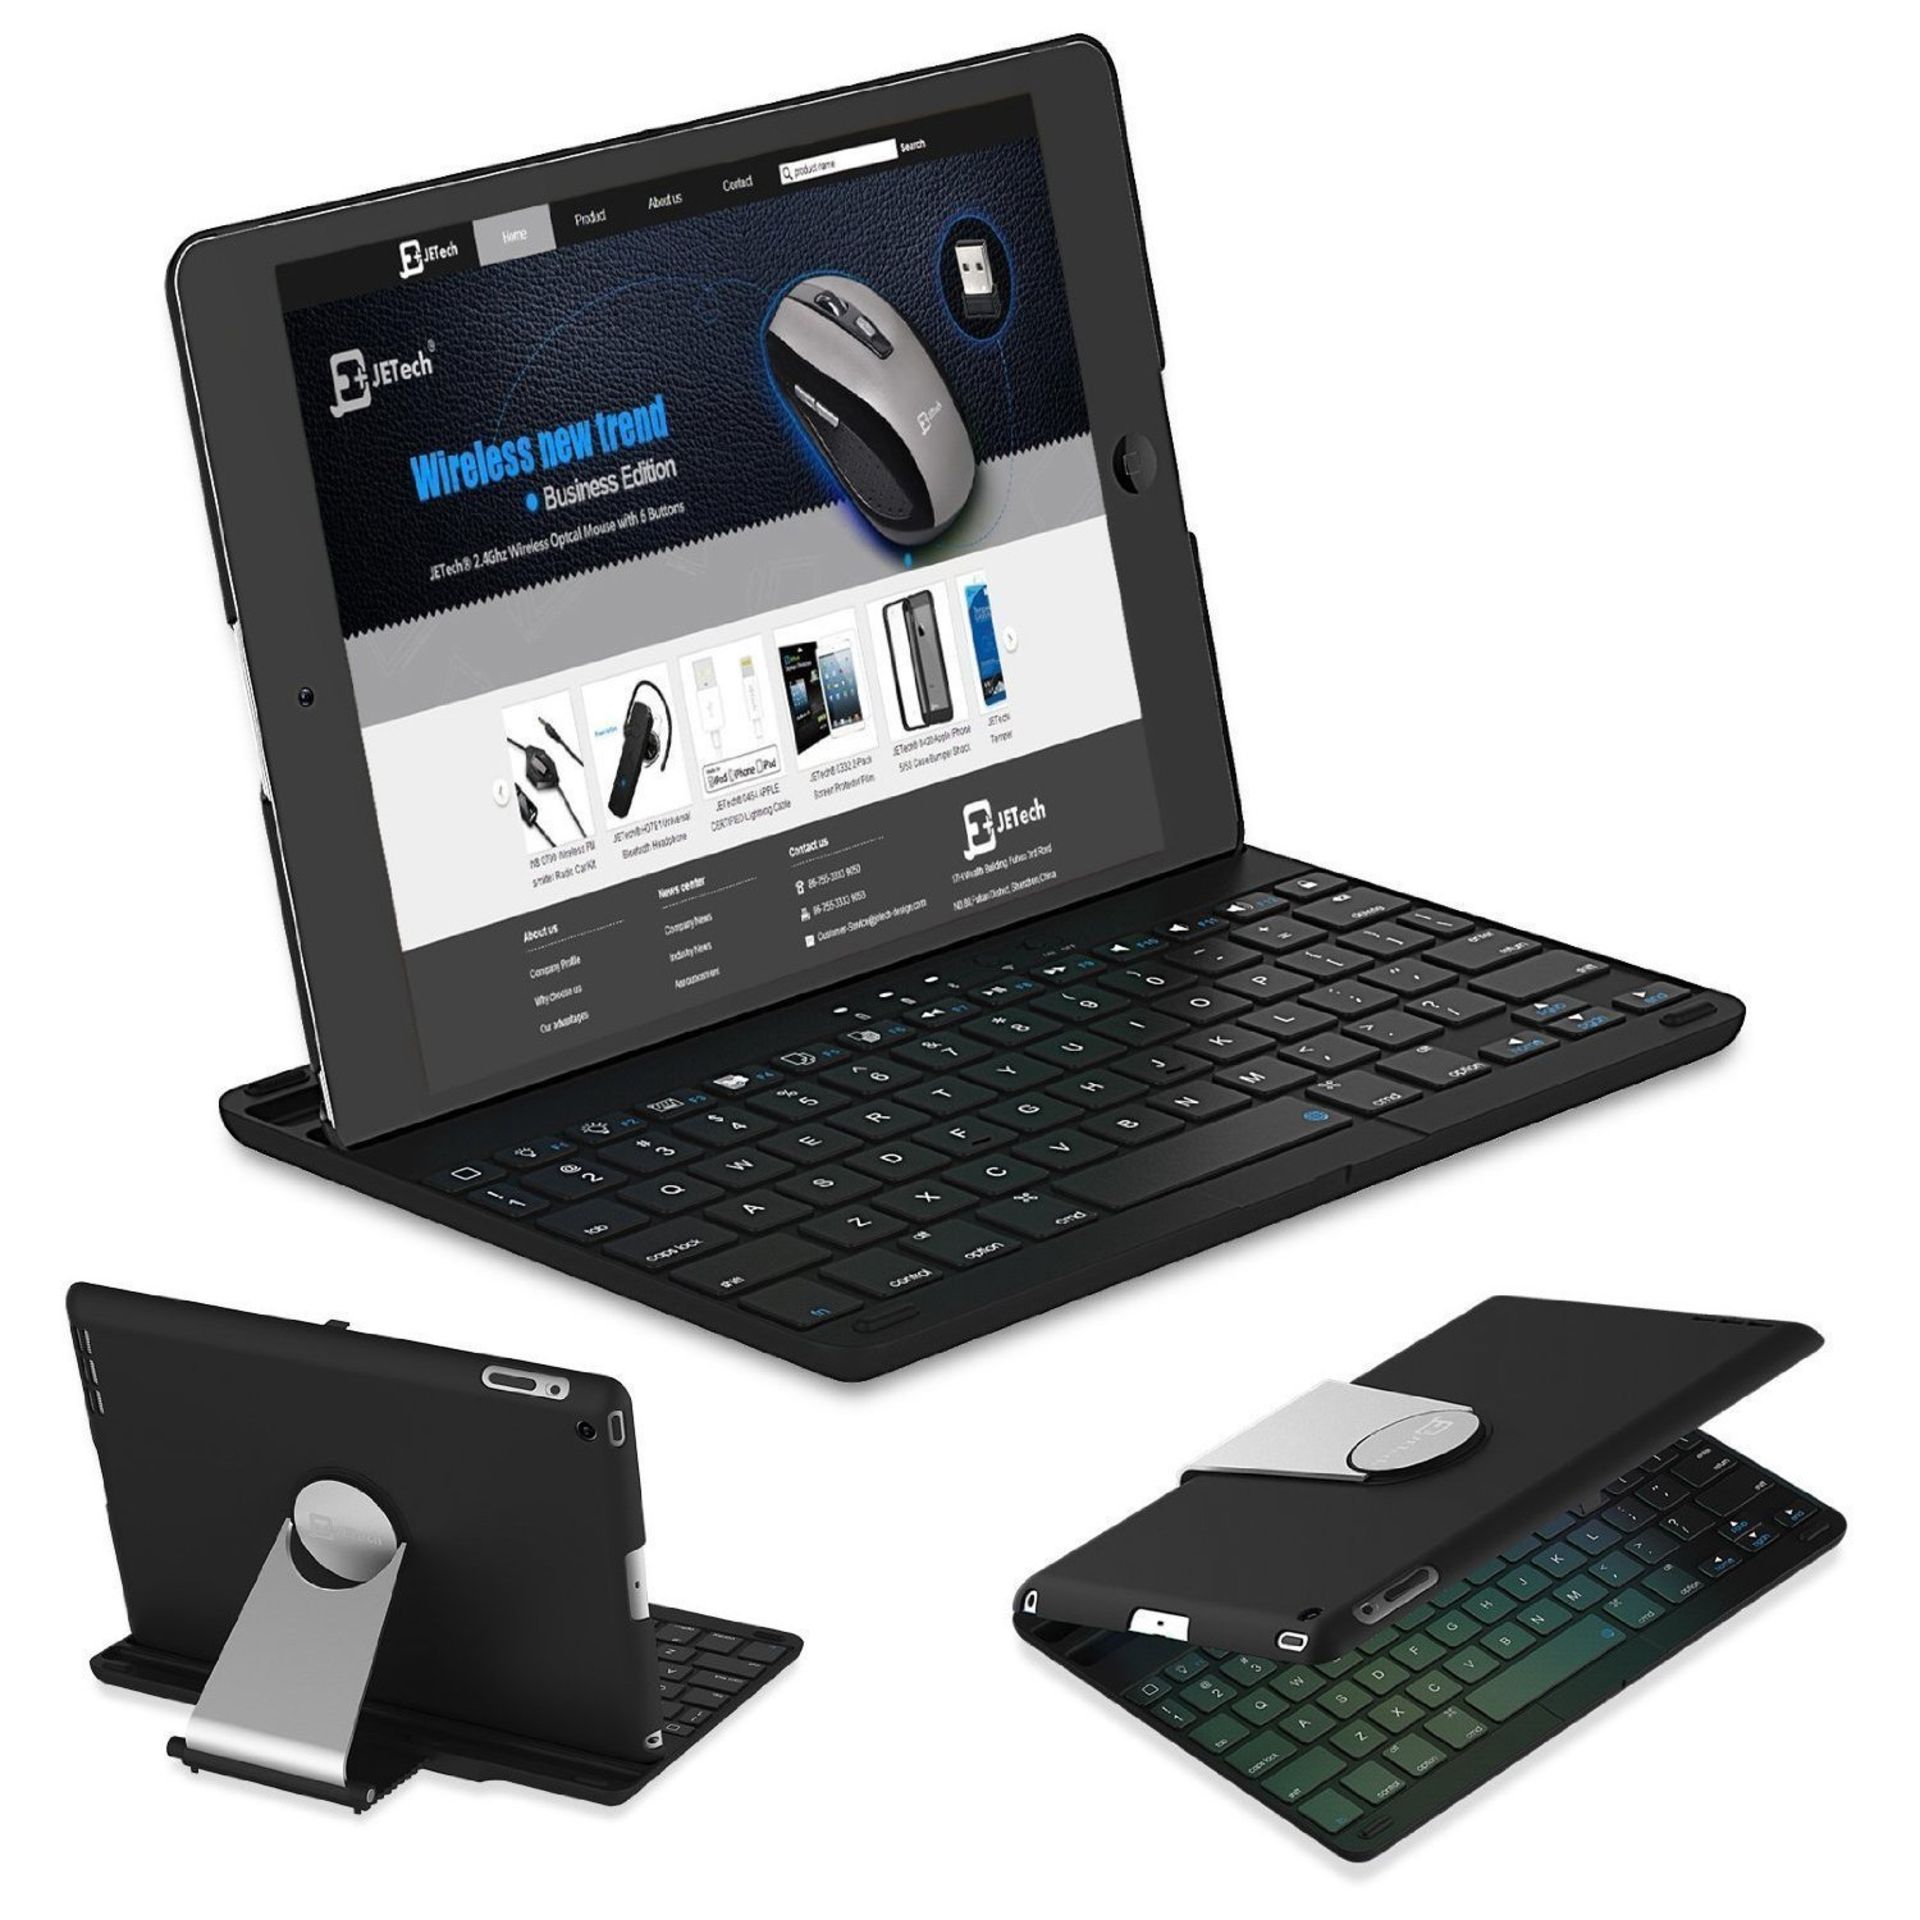 V Brand New Bluetooth Keyboard Case For Apple iPad Air 2 (Amazon Price £24.95) X 2 YOUR BID PRICE TO